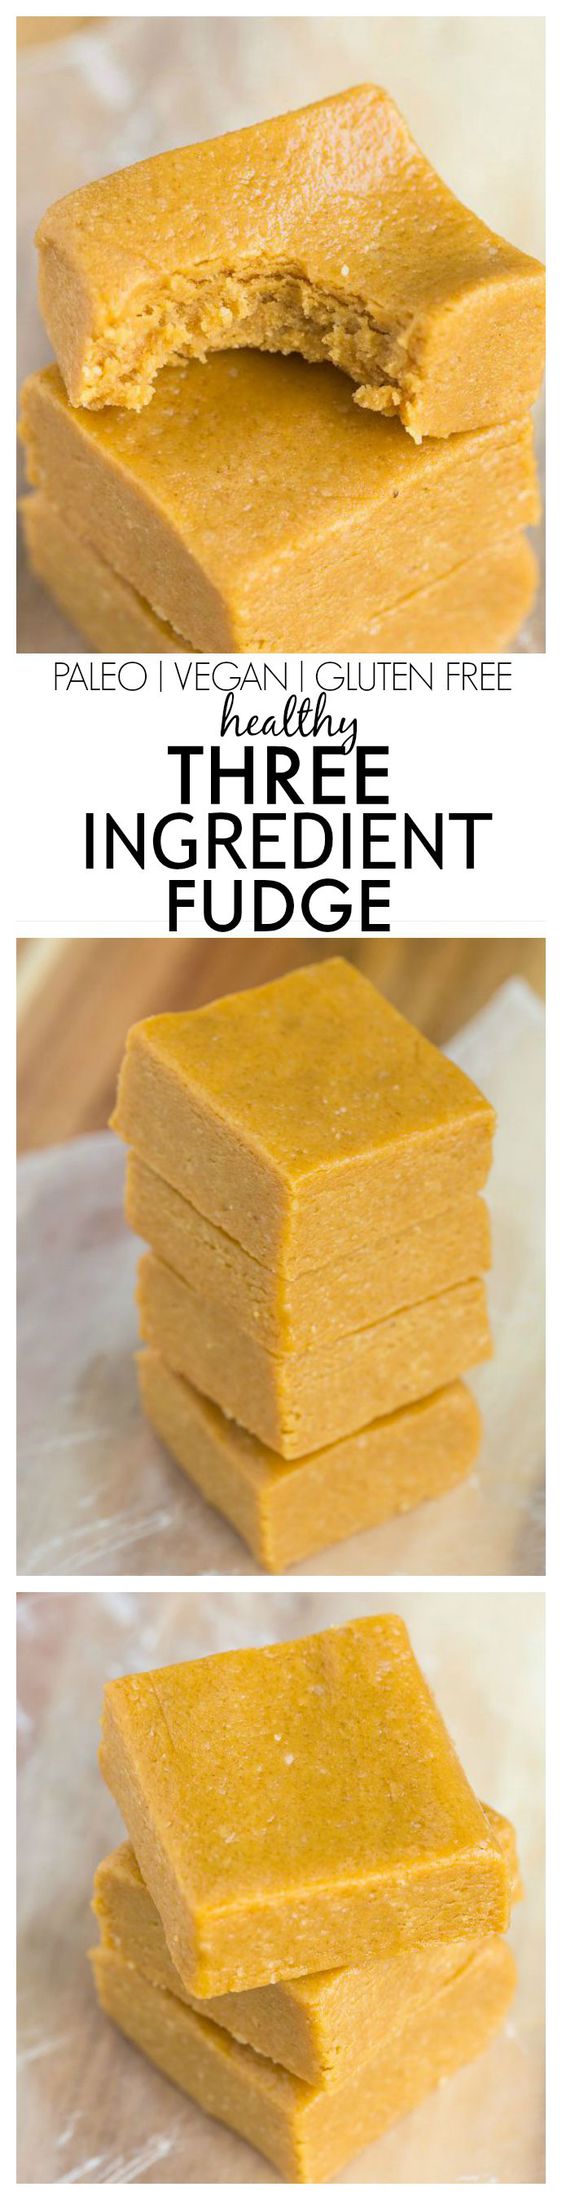 Three Ingredient No Bake Fudge which melts in your mouth and takes 5 minutes! Paleo, vegan and gluten free too!